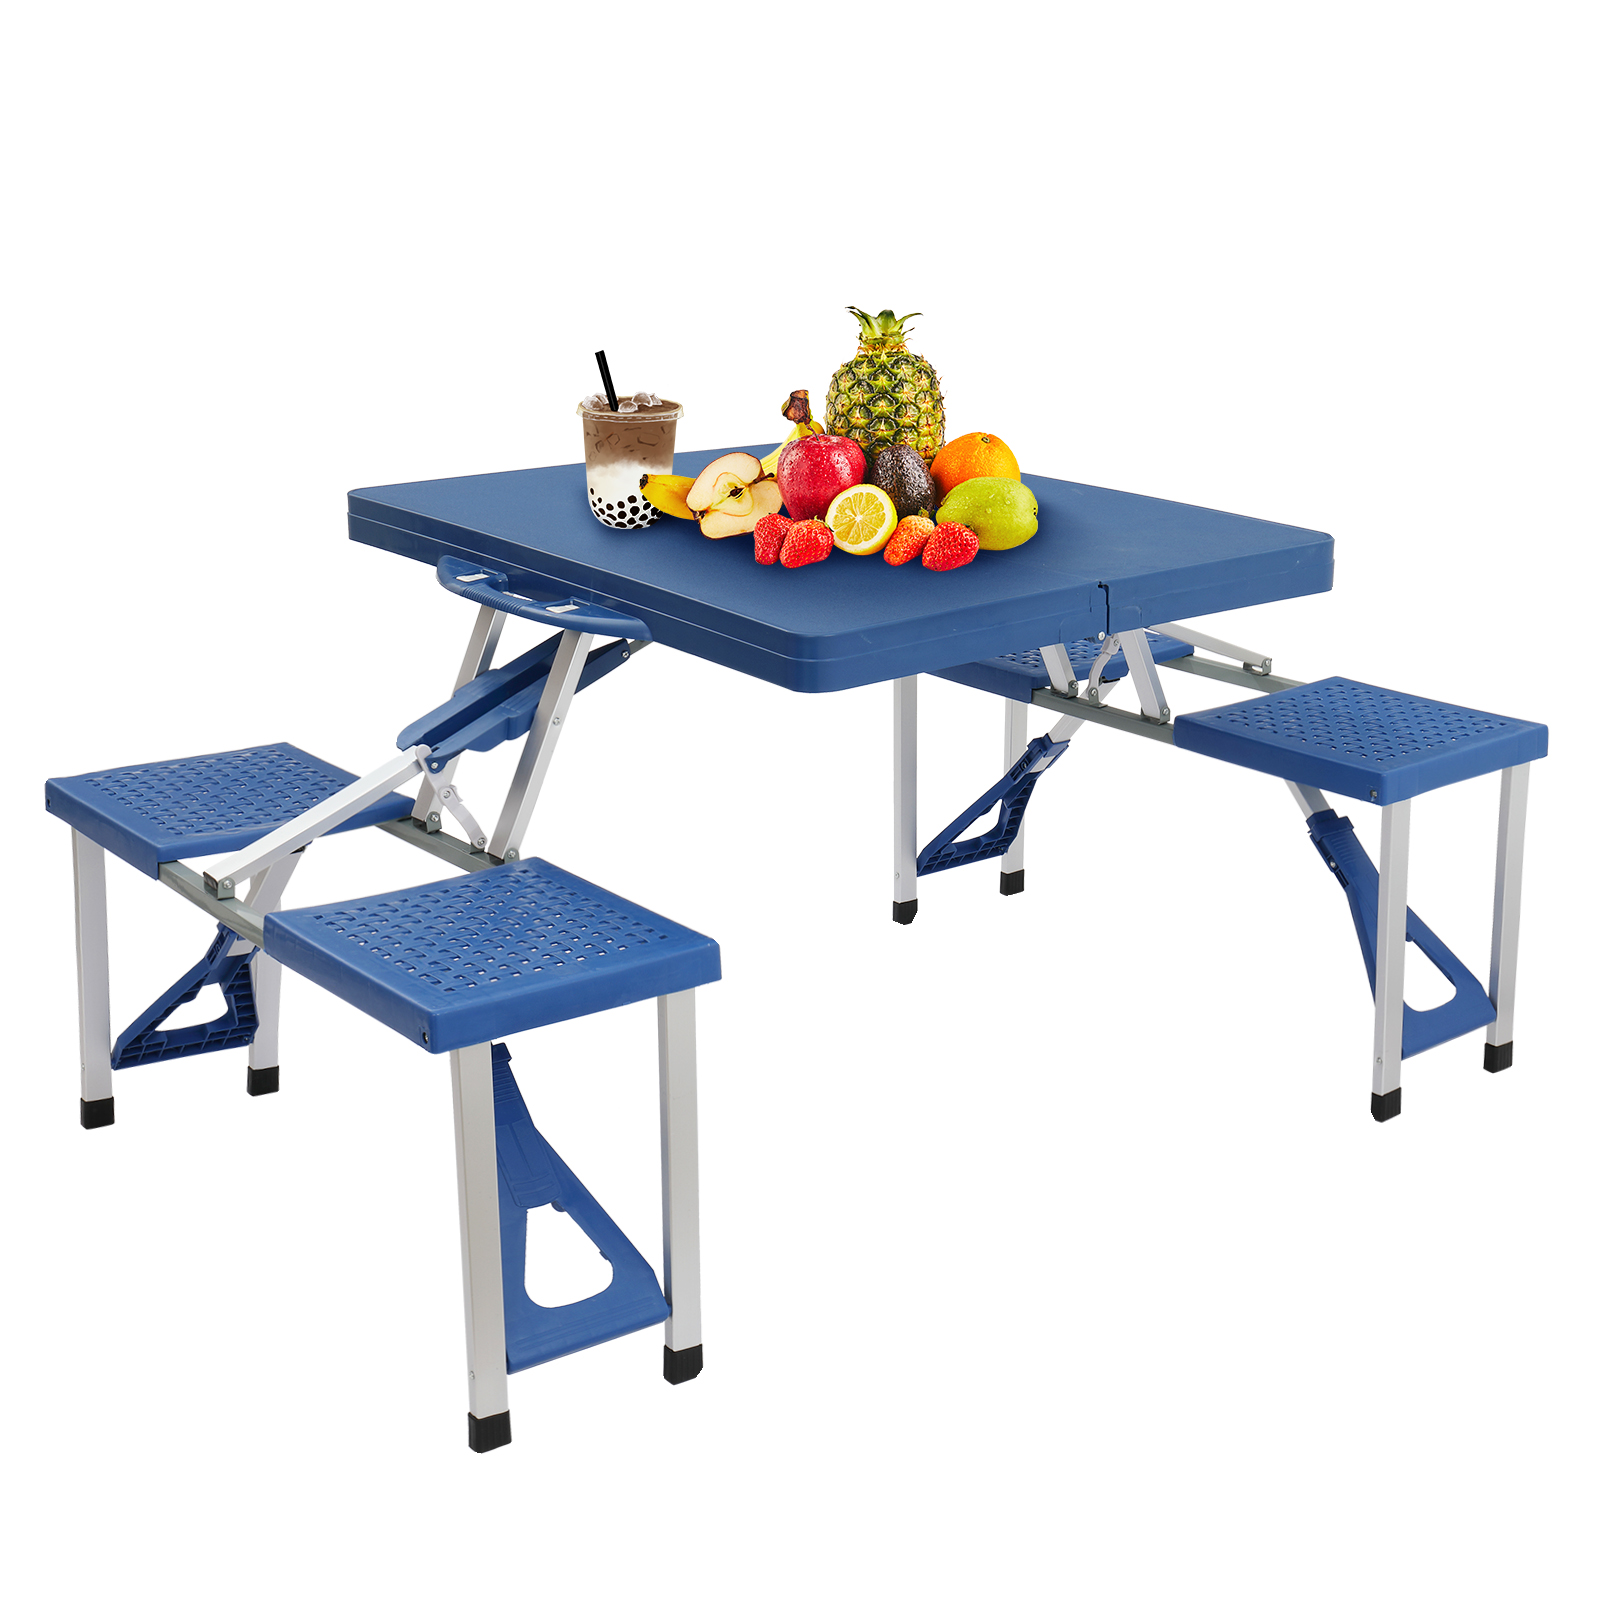 One Piece Folding Table Picnic Table Folding Camping Table Portable Picnic Table Camping Table,Lightweight Compact Aluminum Picnic Table with 4 Seats Chairs and Umbrella Hole for Outdoor Indoor,Blue - image 1 of 9